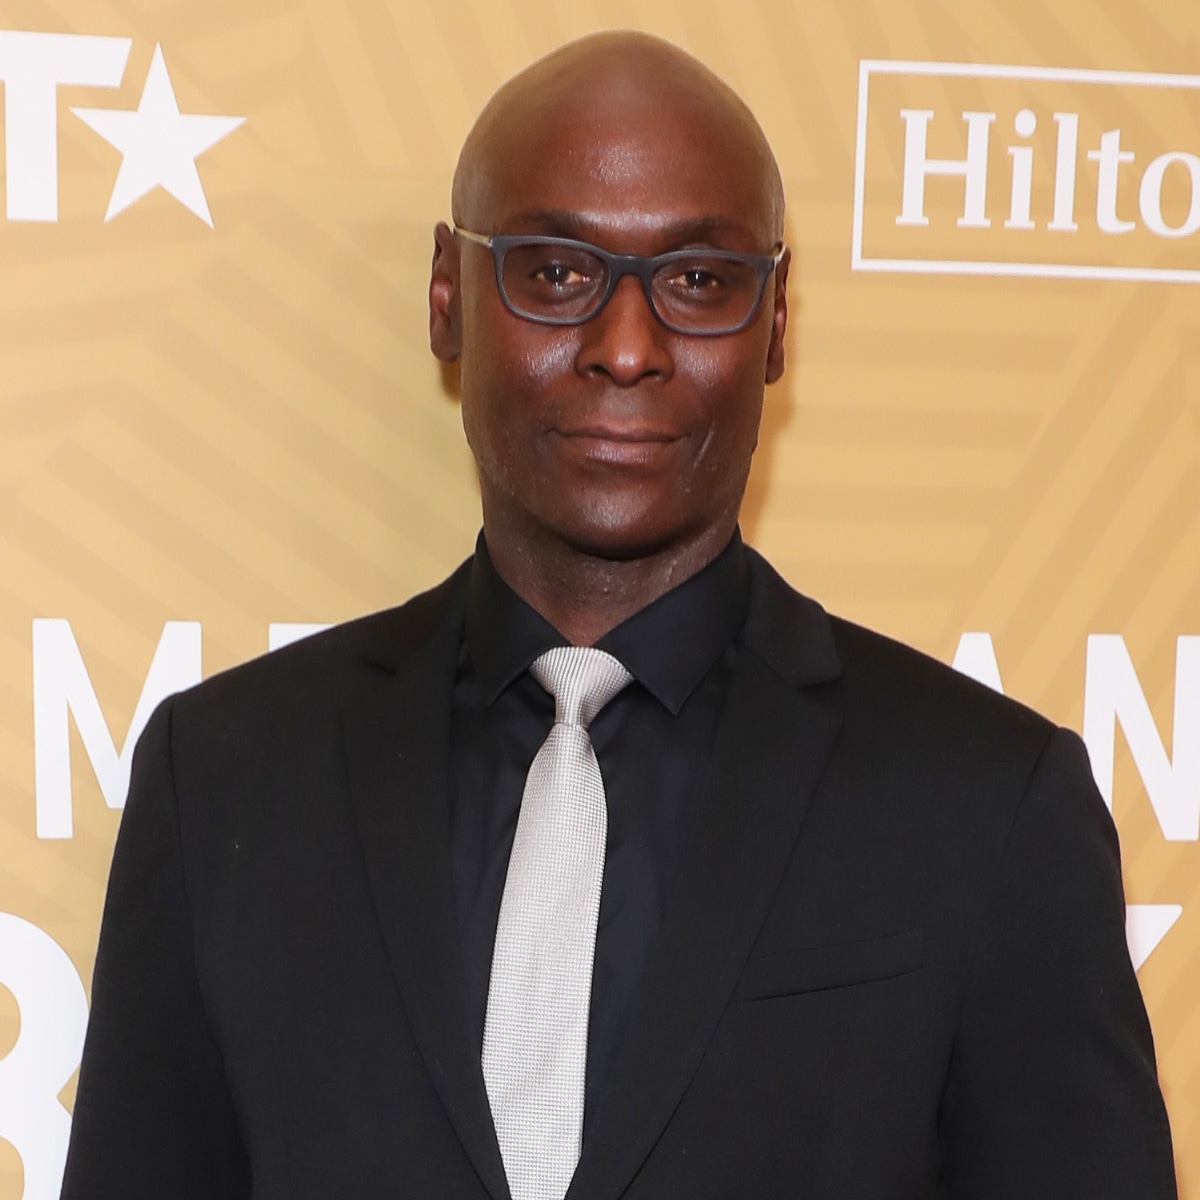 Lance Reddick's Cause Of Death Revealed: He Died From Heart